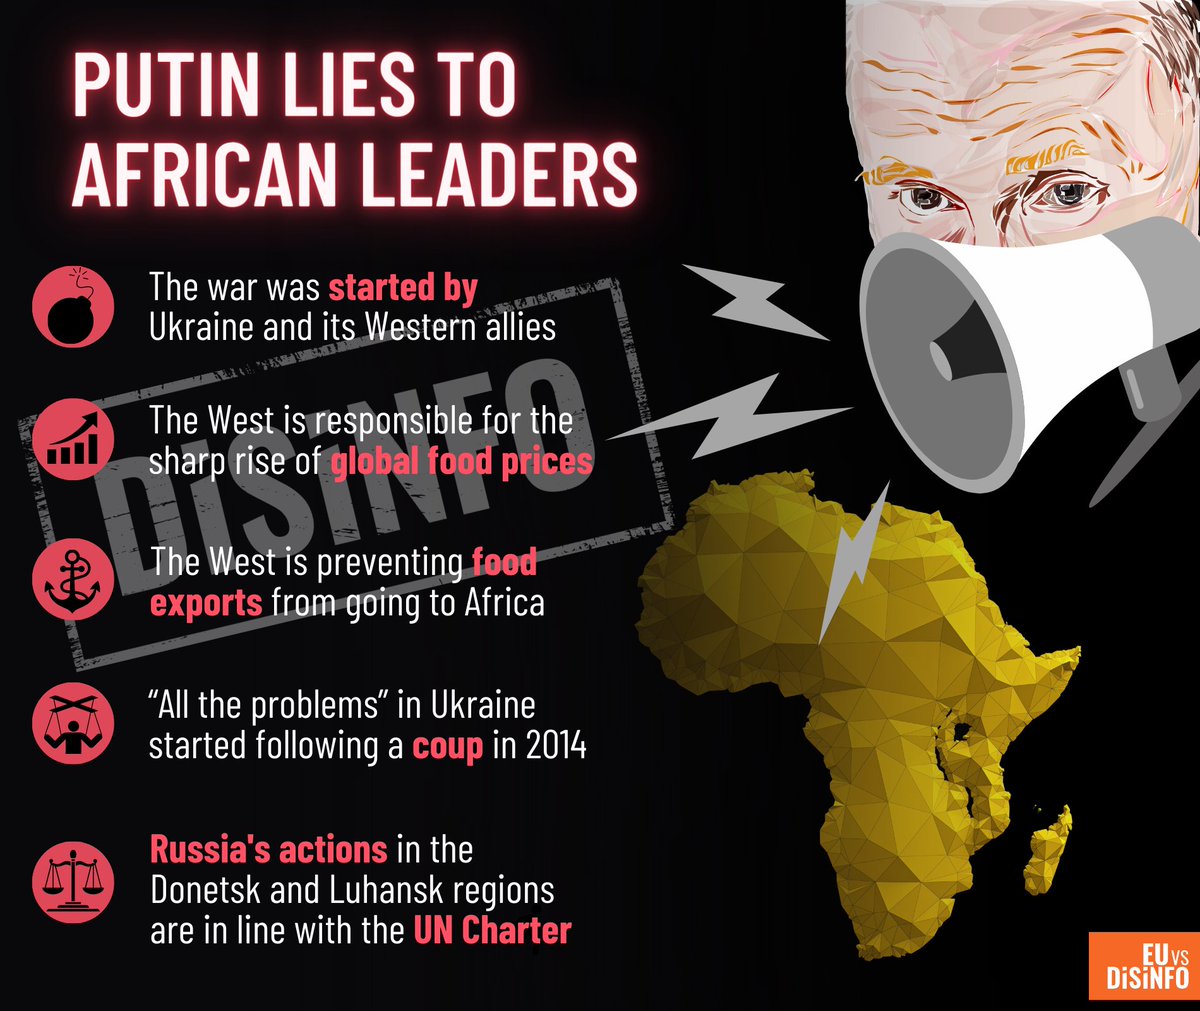 Putin blatantly lied to the African leaders visiting Russia, and  shamelessly pushed some of the most obvious pro-Kremlin #disinformation  narratives about Russia's war against Ukraine.
#DontBeDeceived